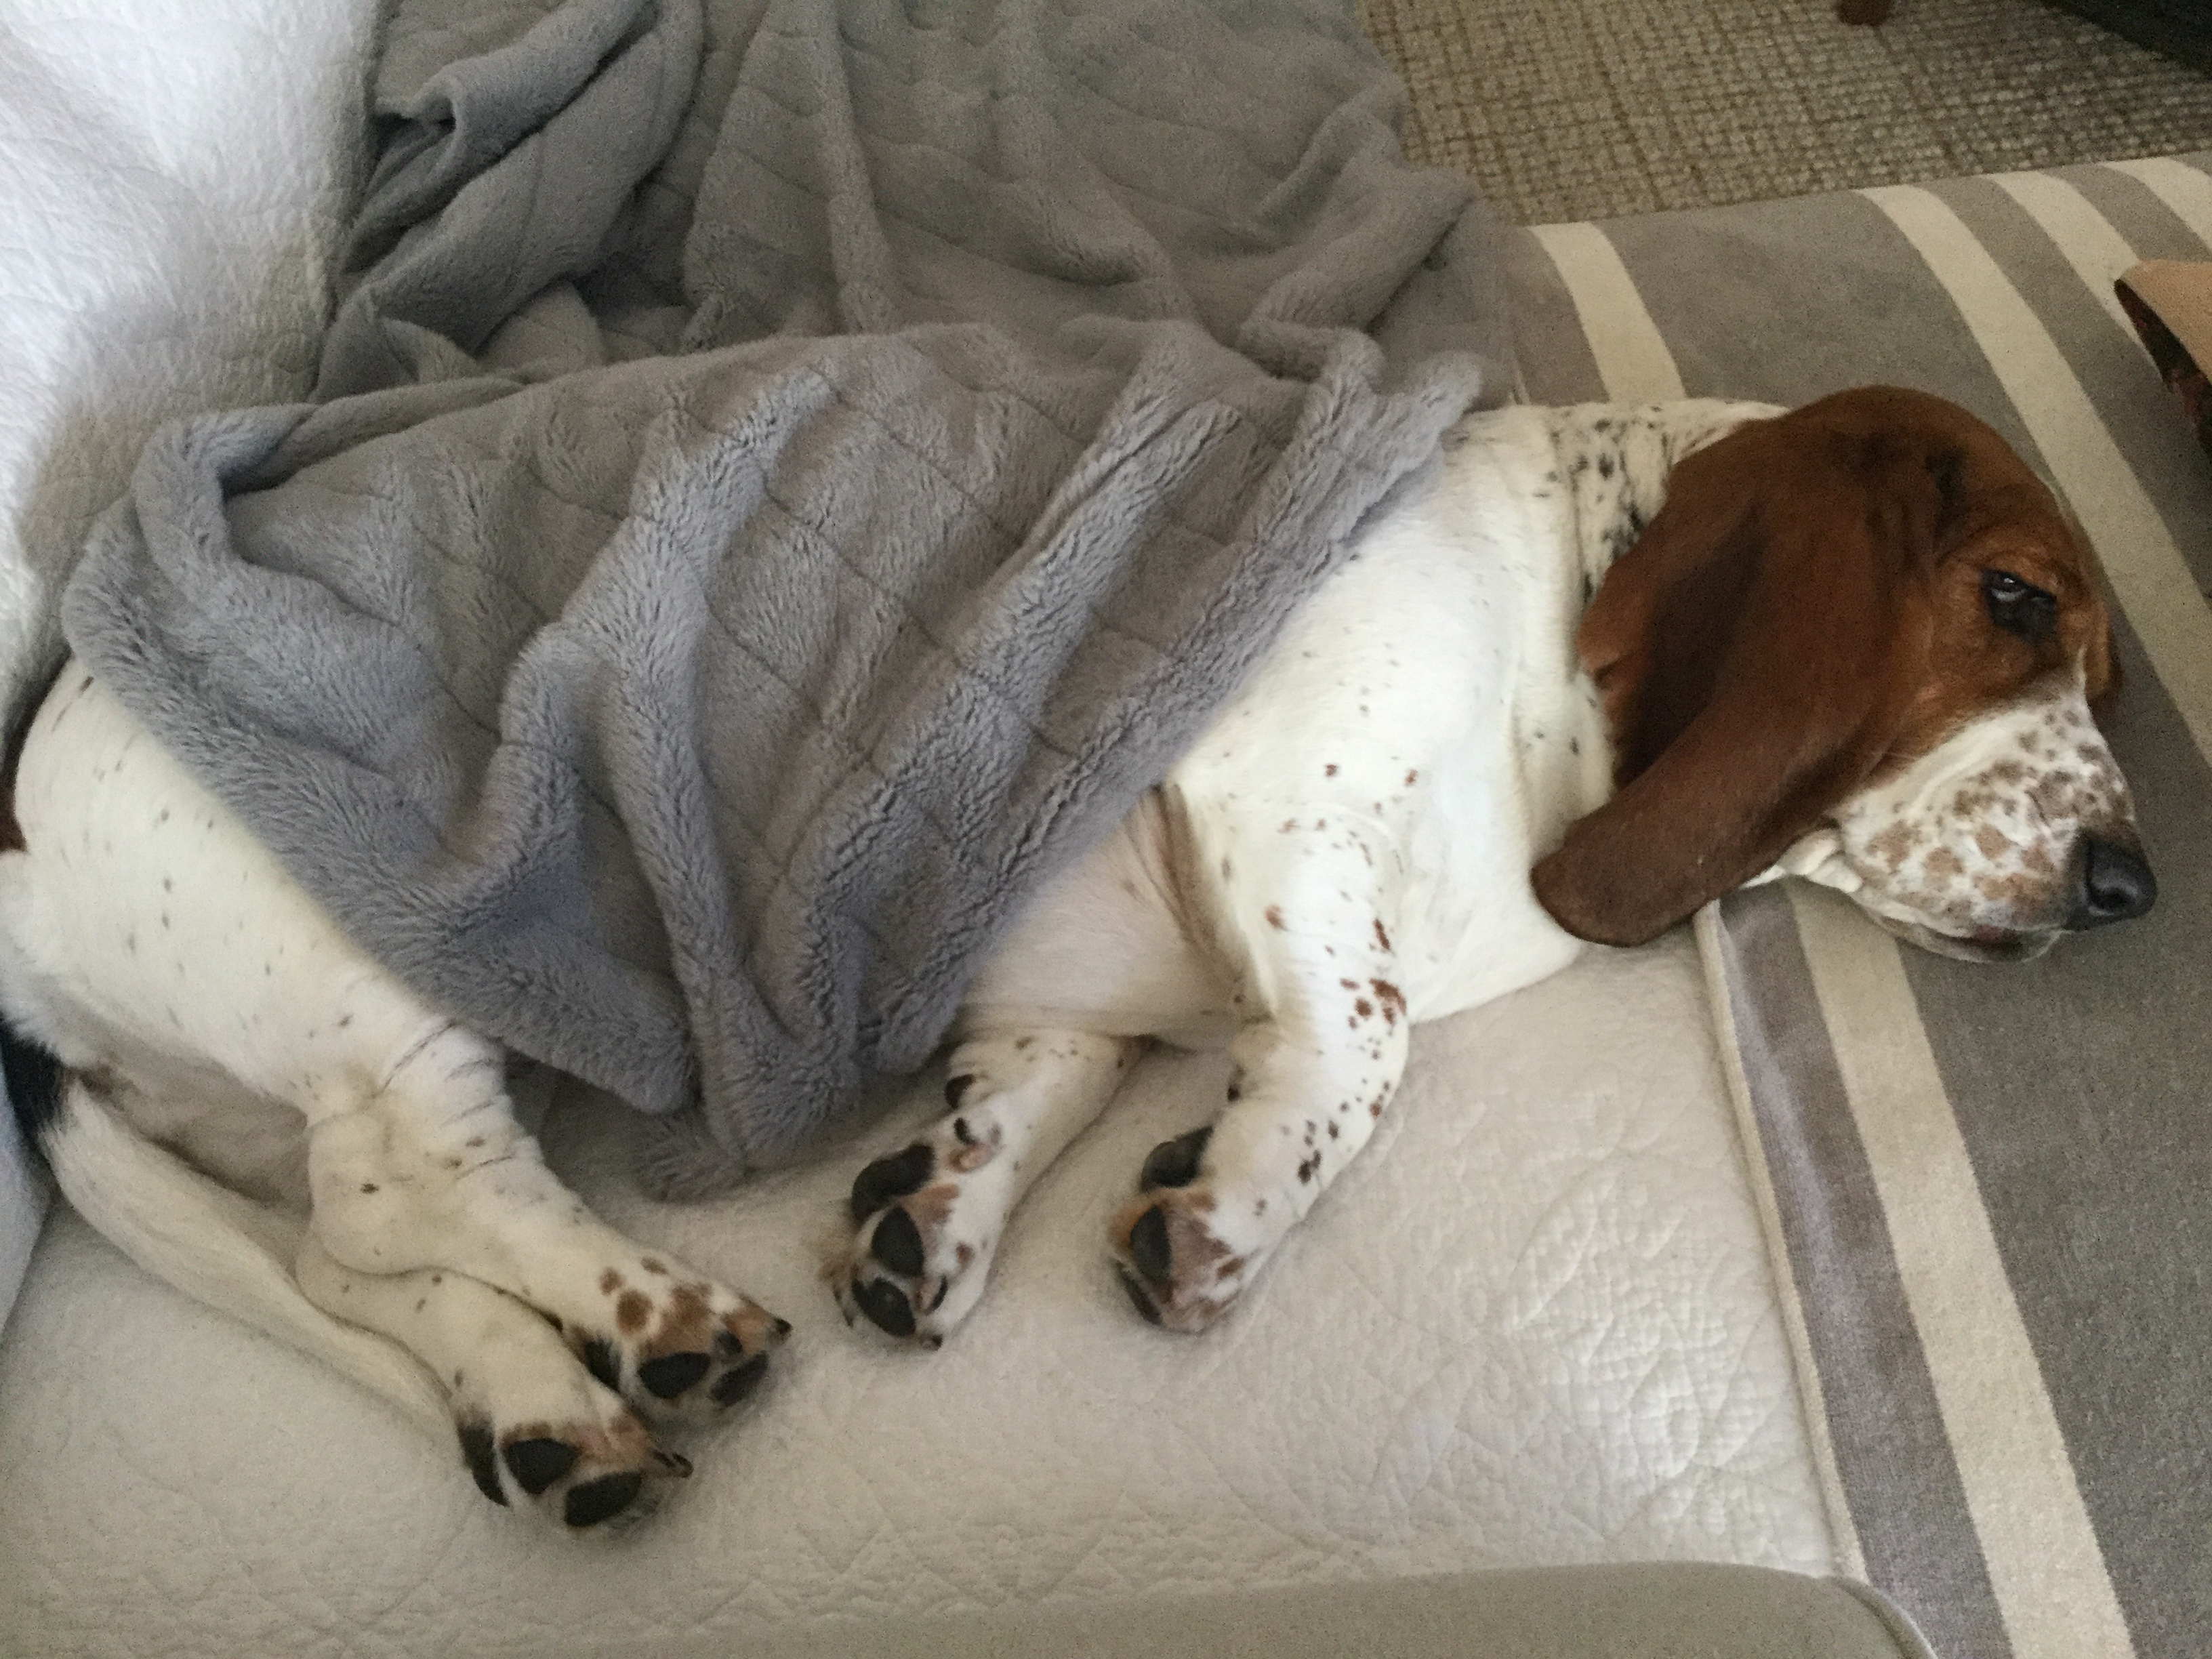 Basset Hound sleeping in couch with gray blanket on its body